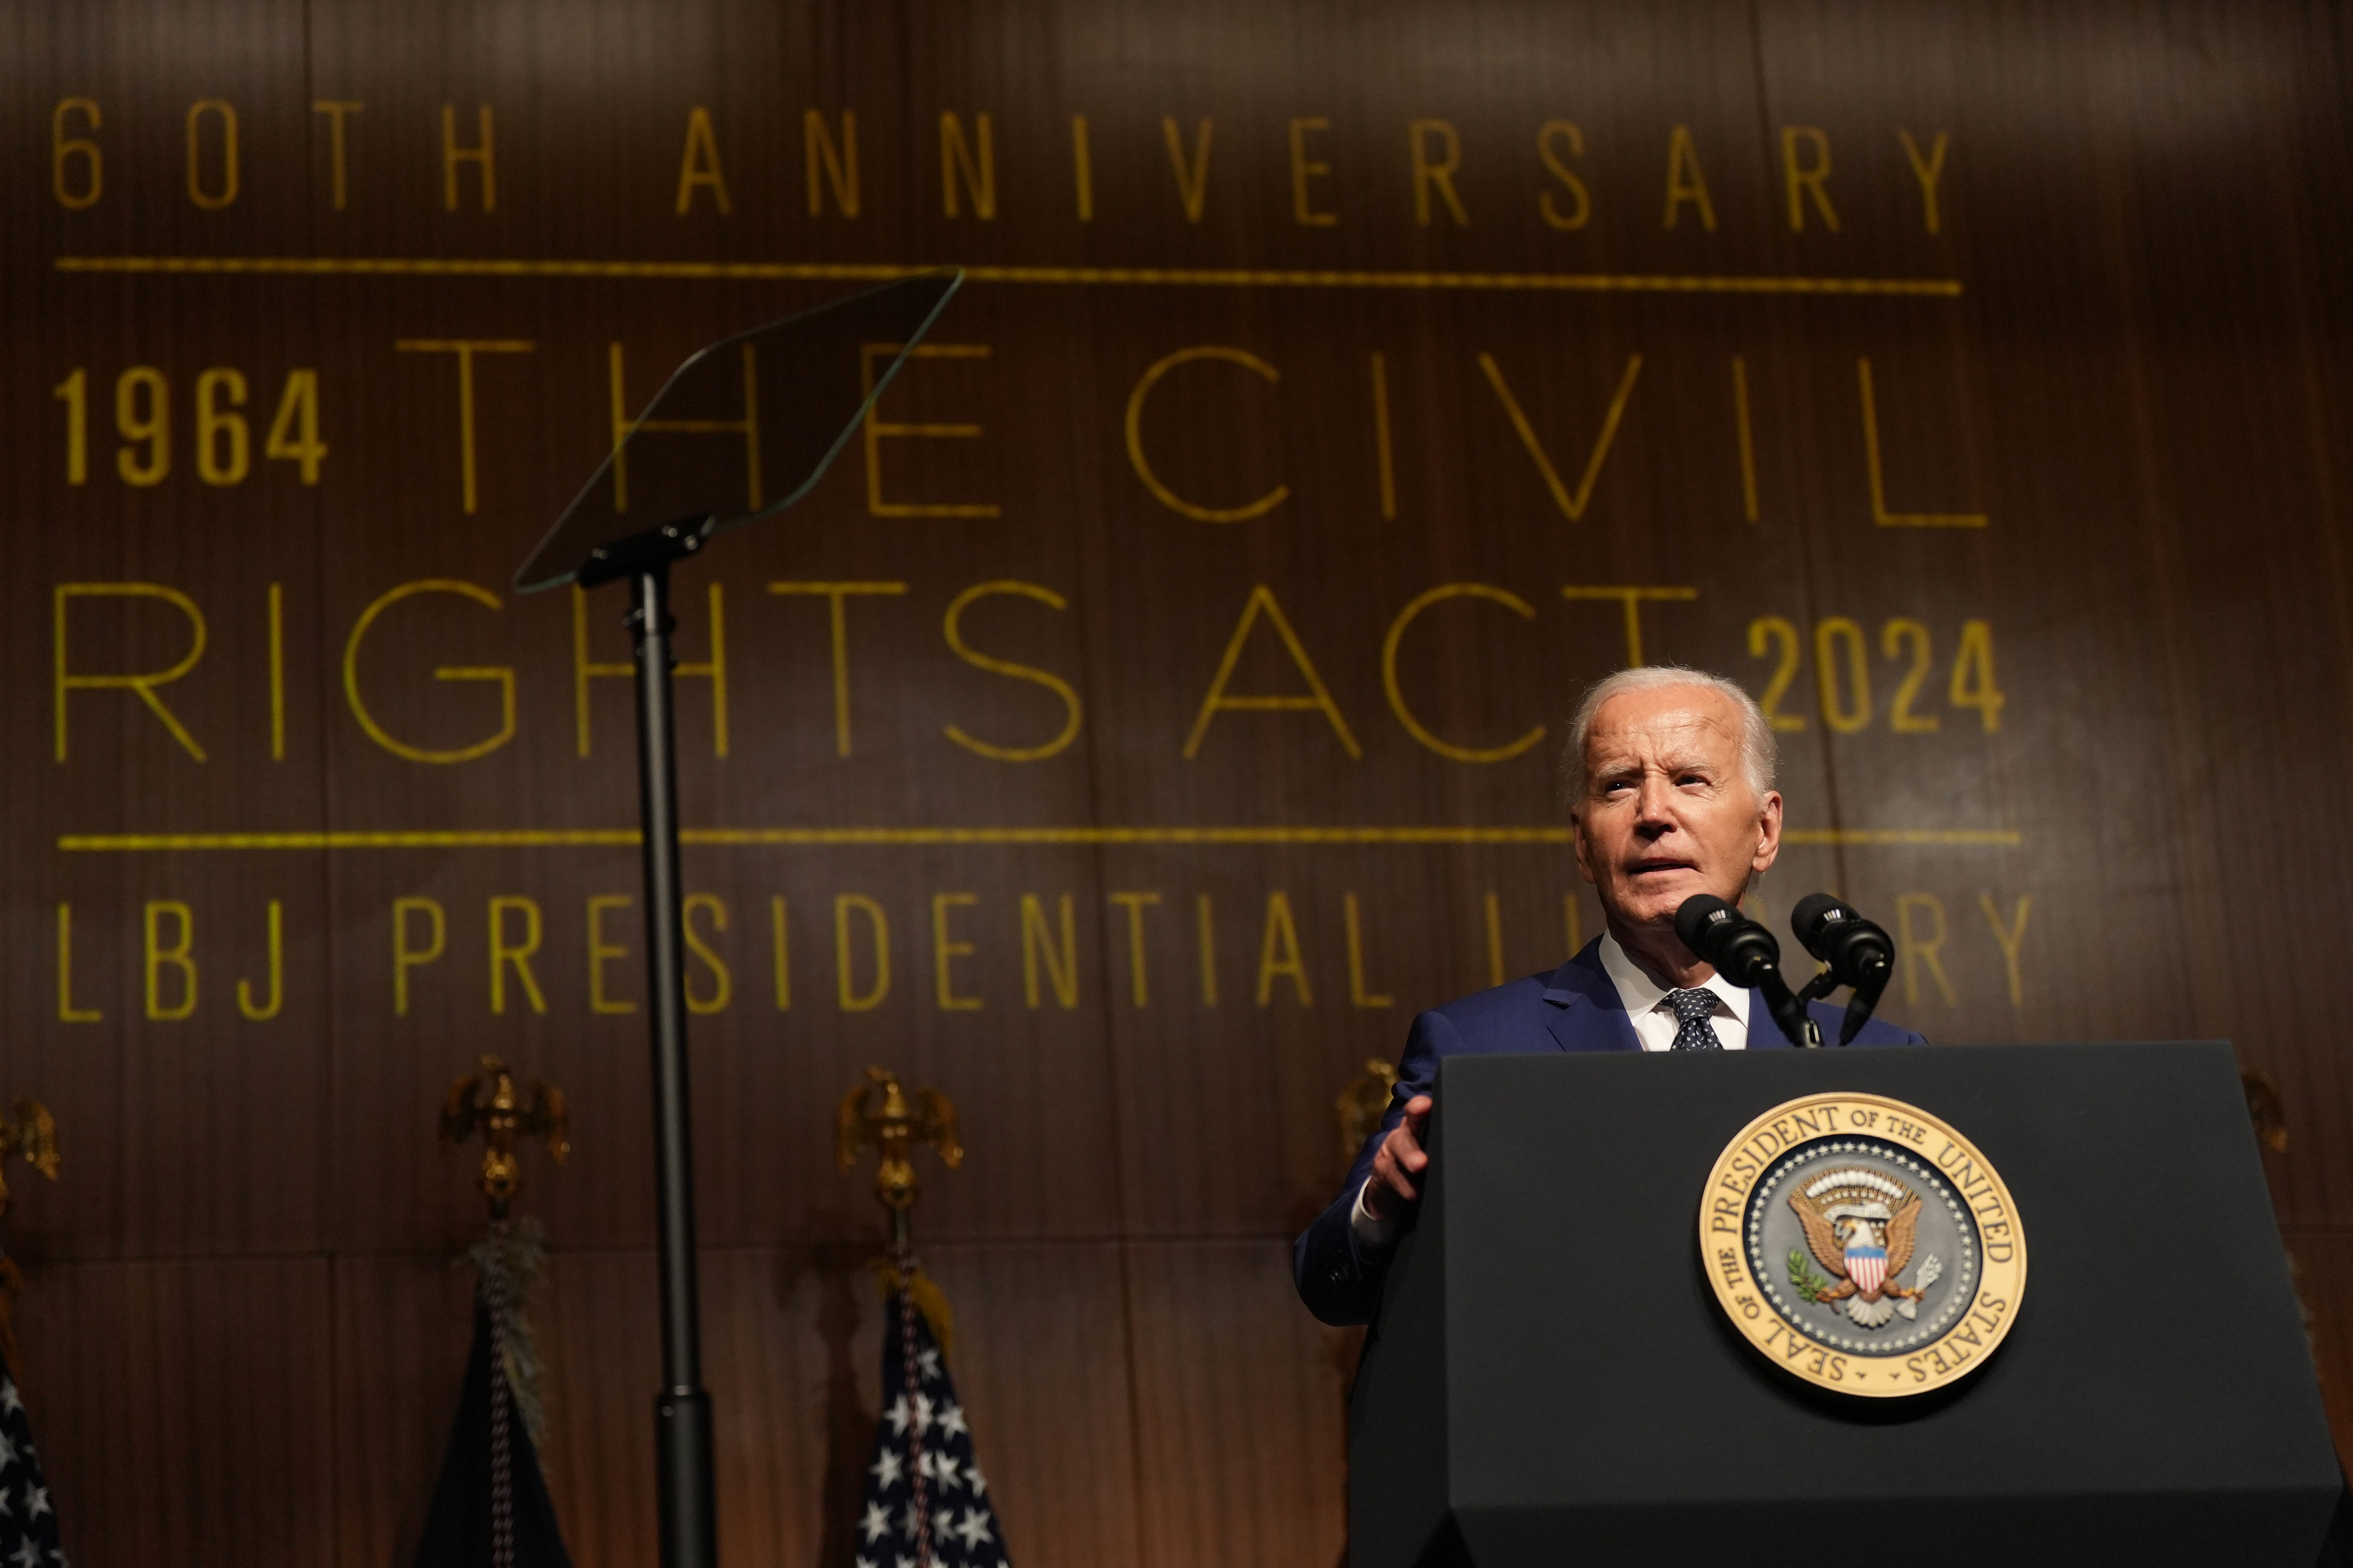 Replay: President Joe Biden visits LBJ Library in Austin to commemorate Civil Rights Act